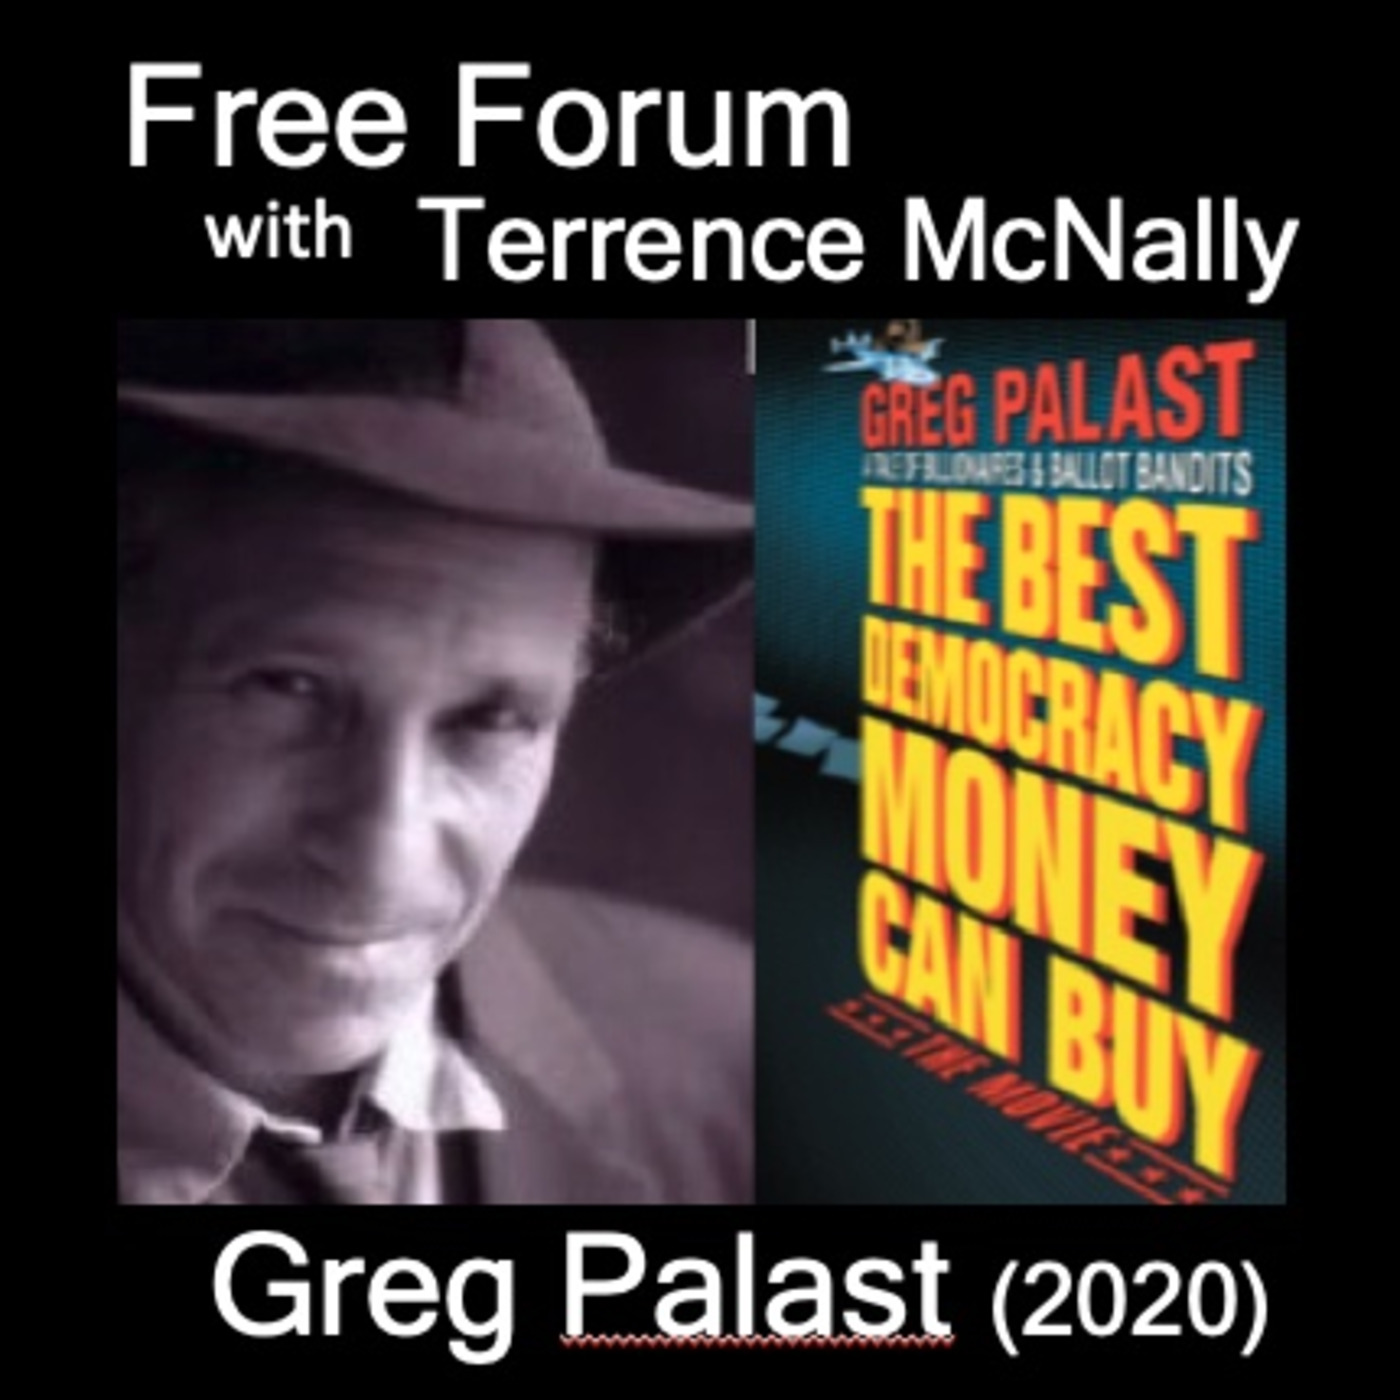 Episode 577: How do Republicans plan to keep you from voting? - Investigative journalist GREG PALAST (2020)